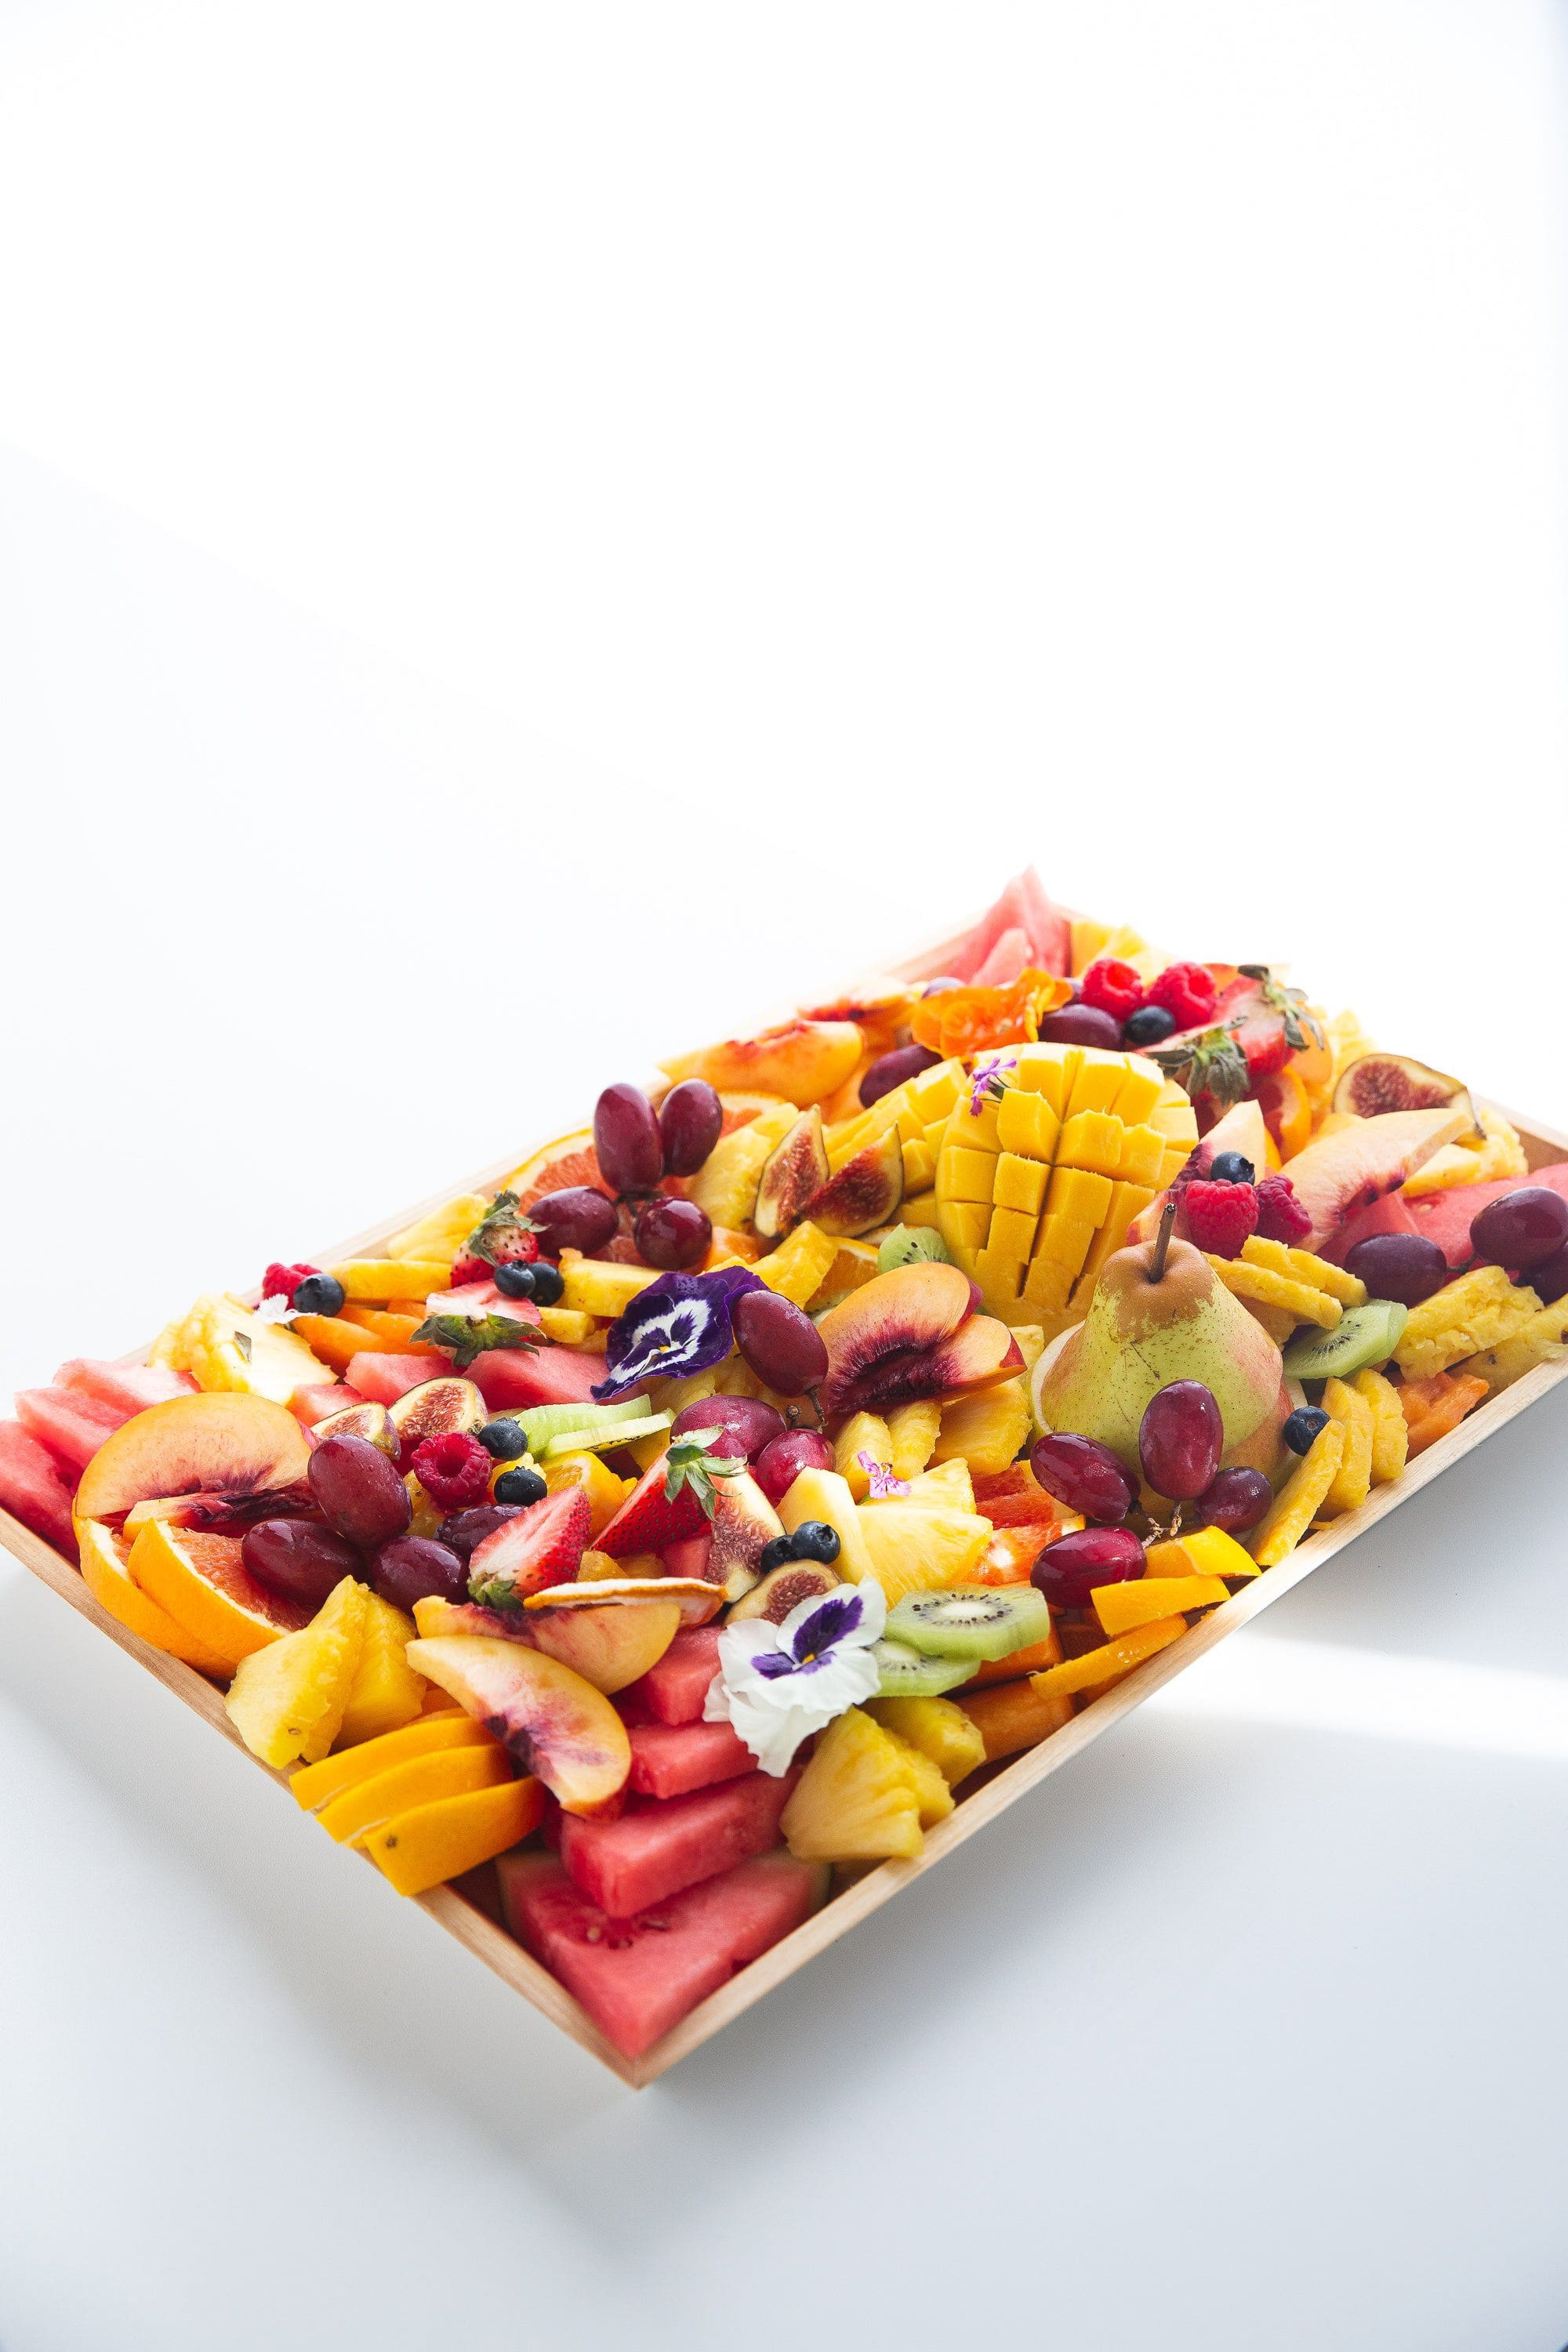 Best fruit platter for delivery in Toronto Ontario